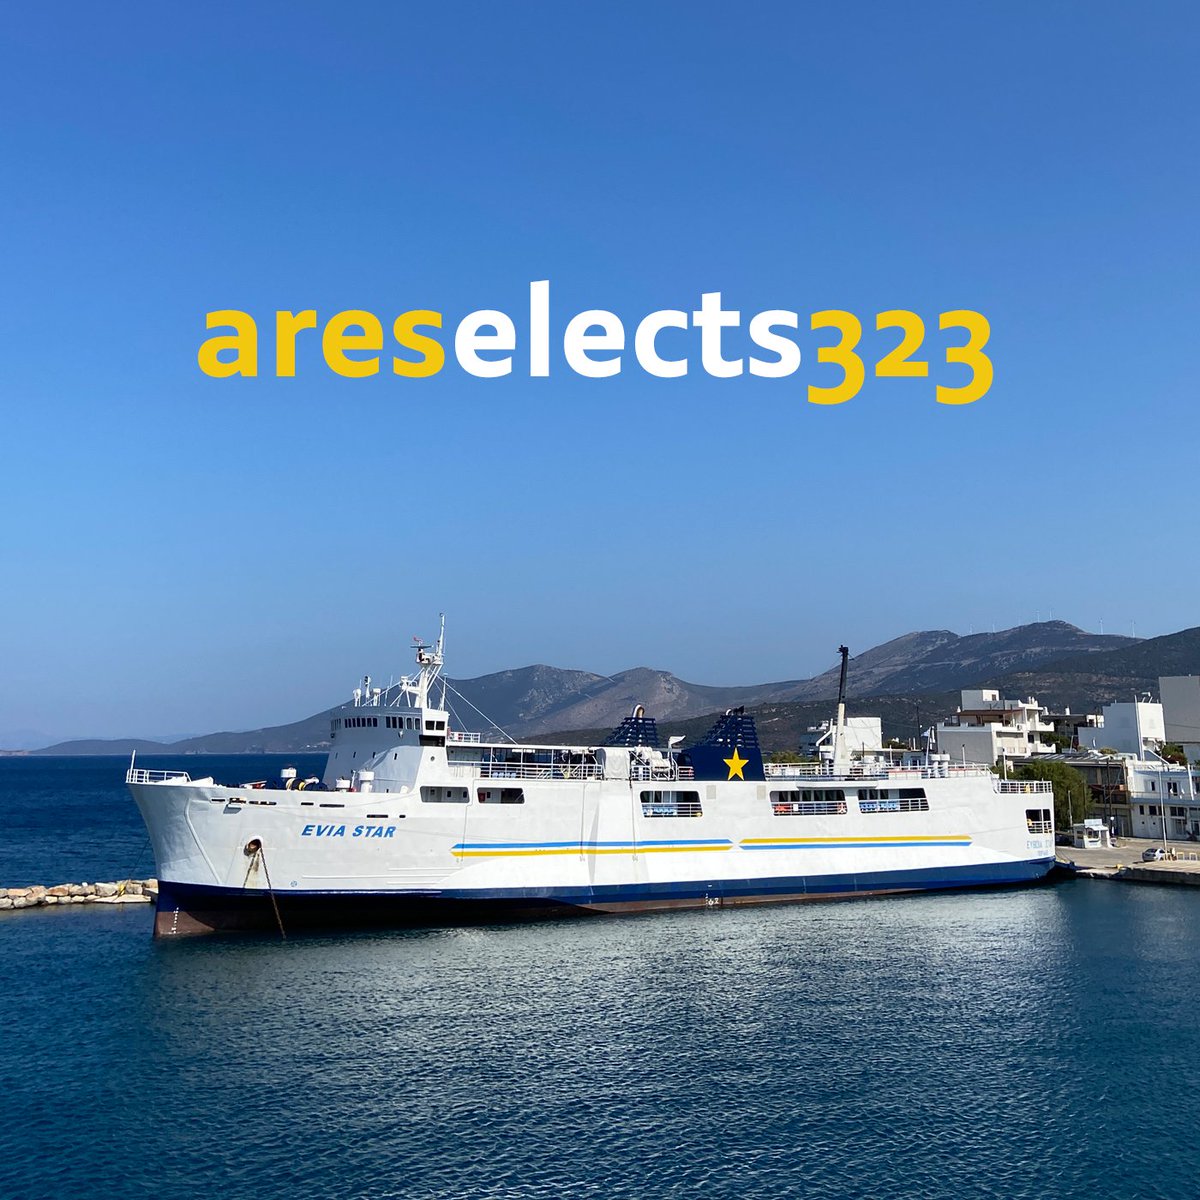 areselects 323 @rodonfm | 19.07.2023 File under: electronic, indie rock, art pop. Listen here: rss.com/podcasts/arese… Supported by @astralonmedia